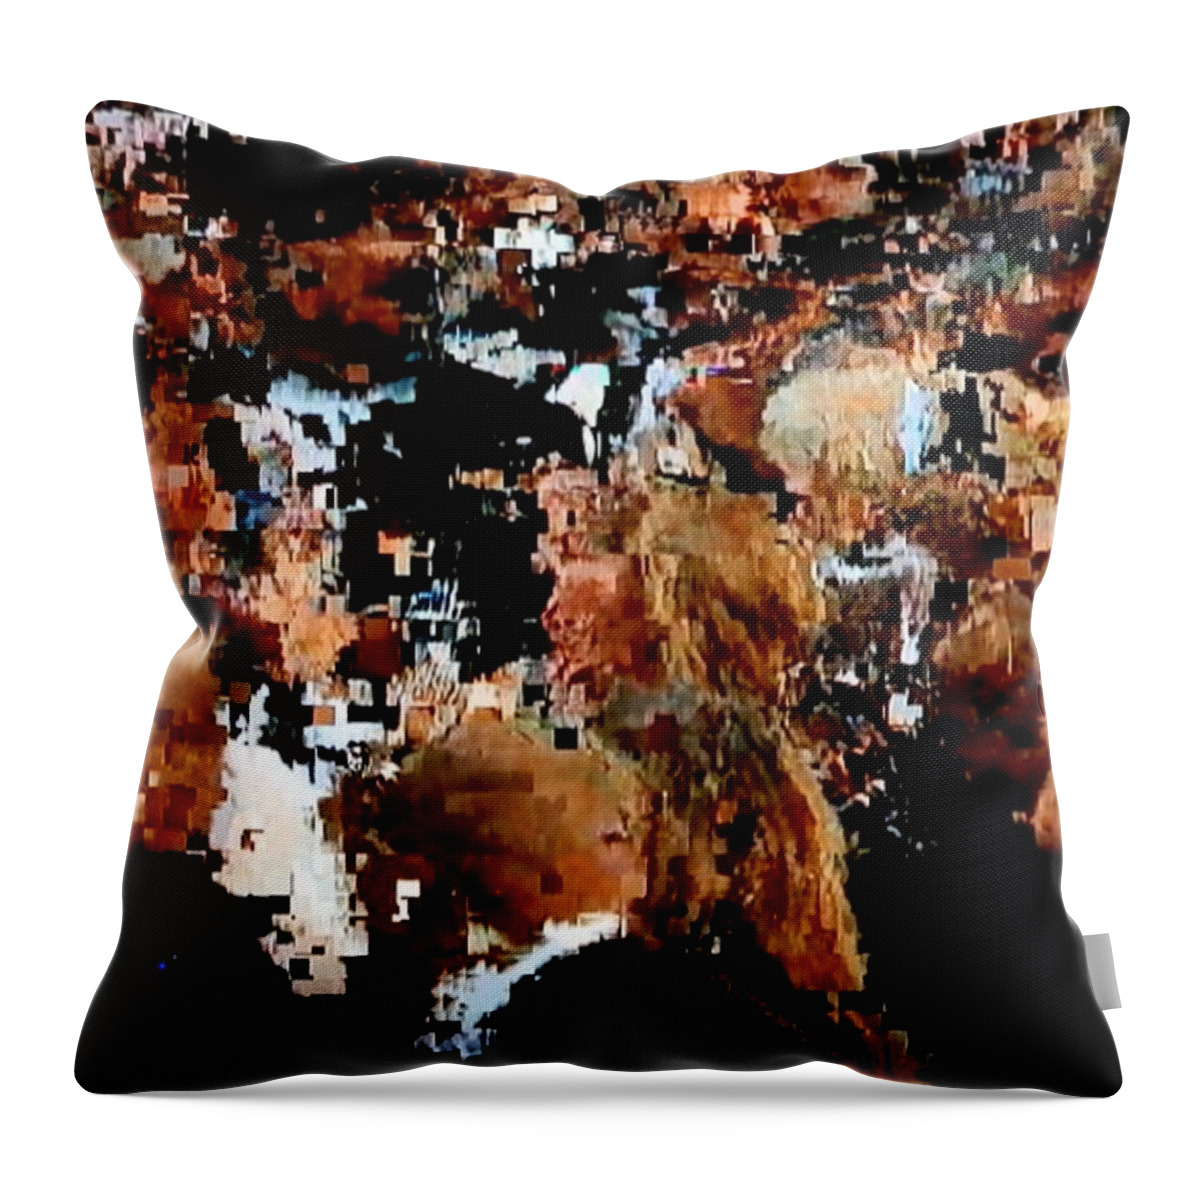 Abstract Throw Pillow featuring the photograph In The Crowd by Michael Sharber